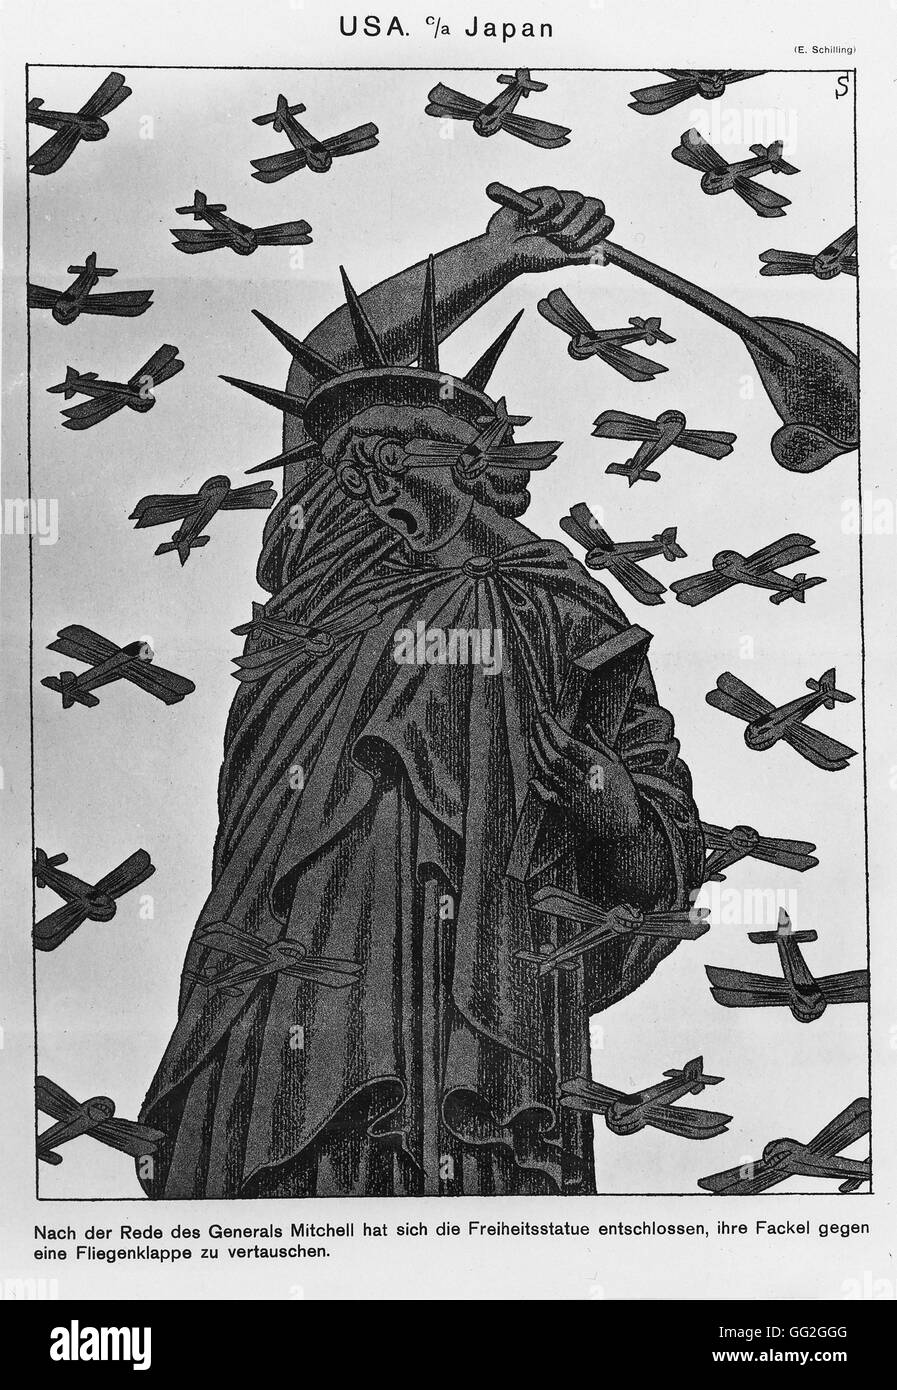 Cartoon depicting the Statue of Liberty swatting at a swarm of Japanese planes, based on the conjectures of General Mitchell. c.1924 Stock Photo